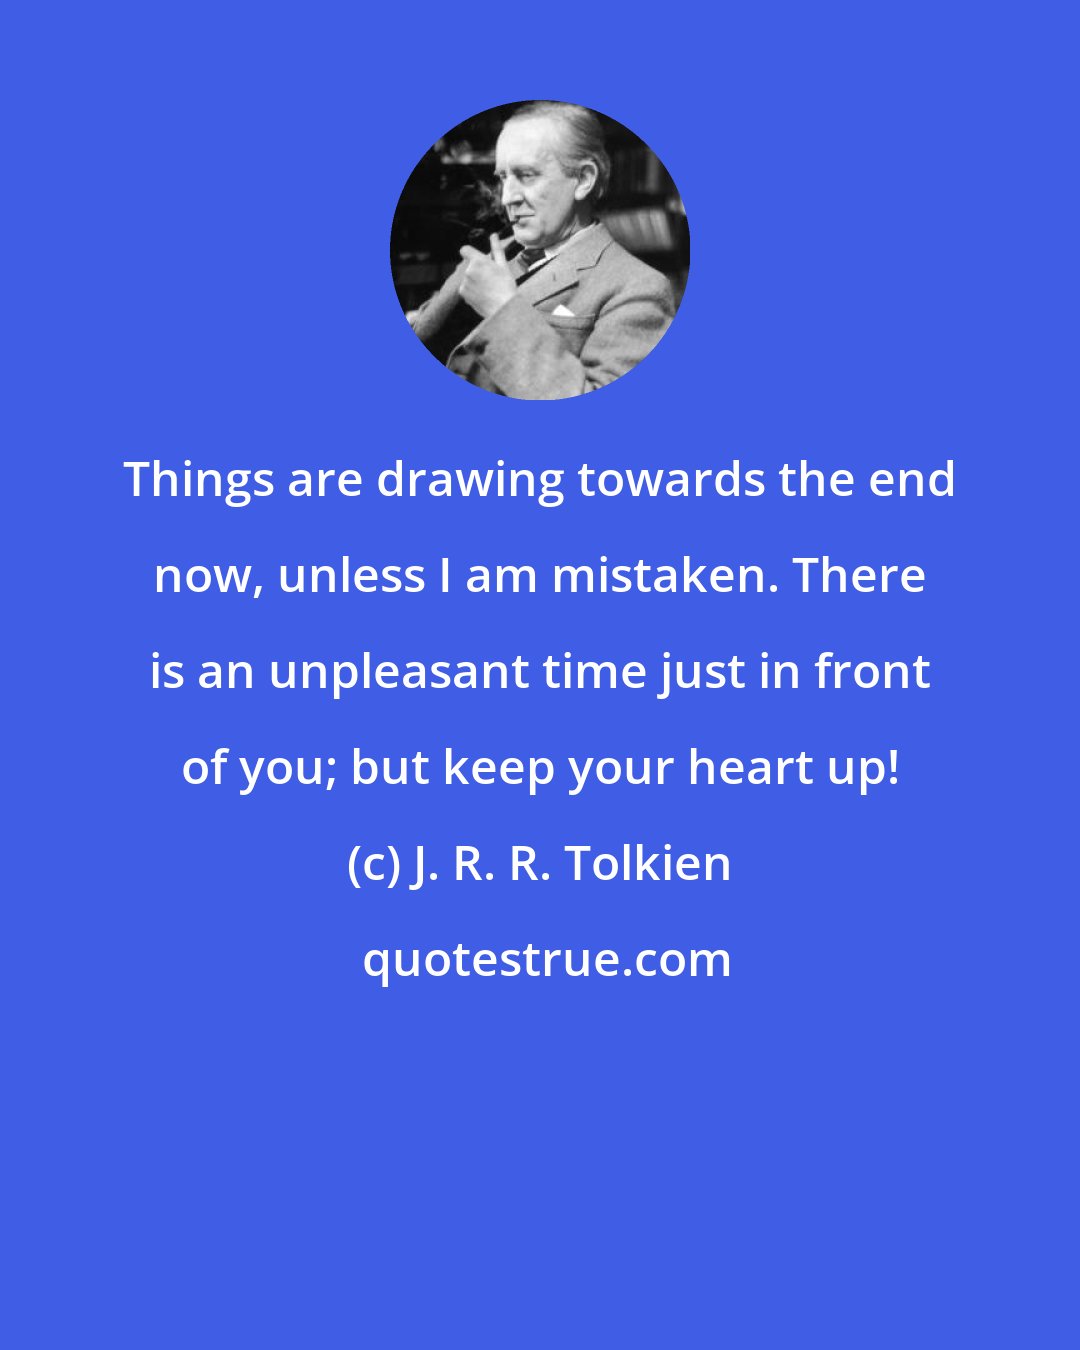 J. R. R. Tolkien: Things are drawing towards the end now, unless I am mistaken. There is an unpleasant time just in front of you; but keep your heart up!